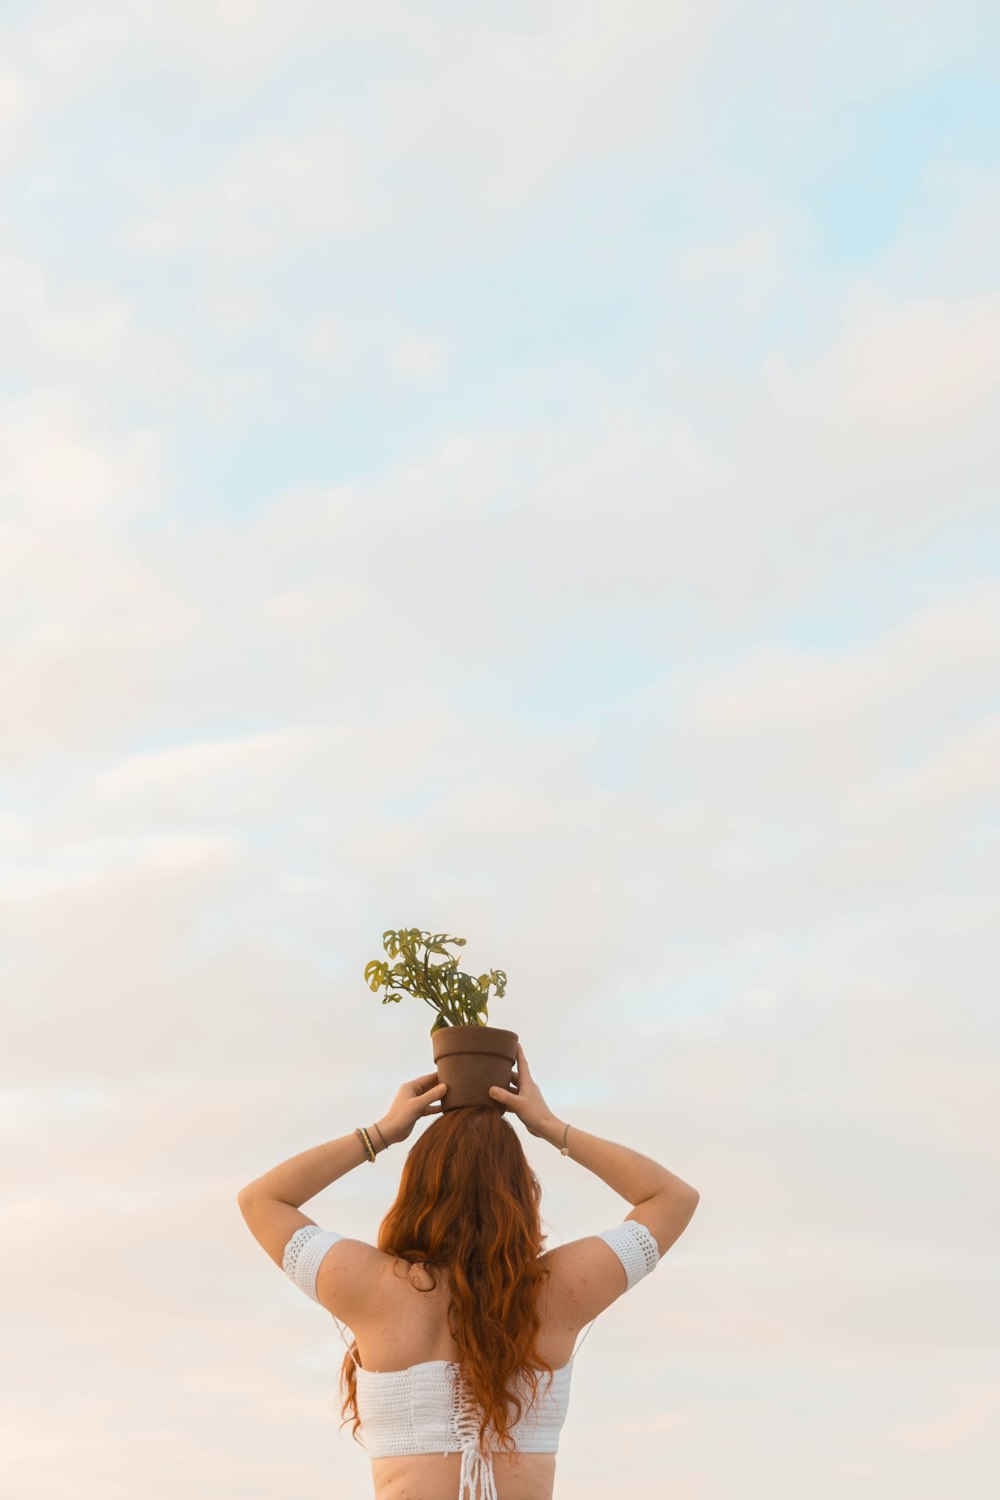 a woman in a bikini holding a potted plant on her head